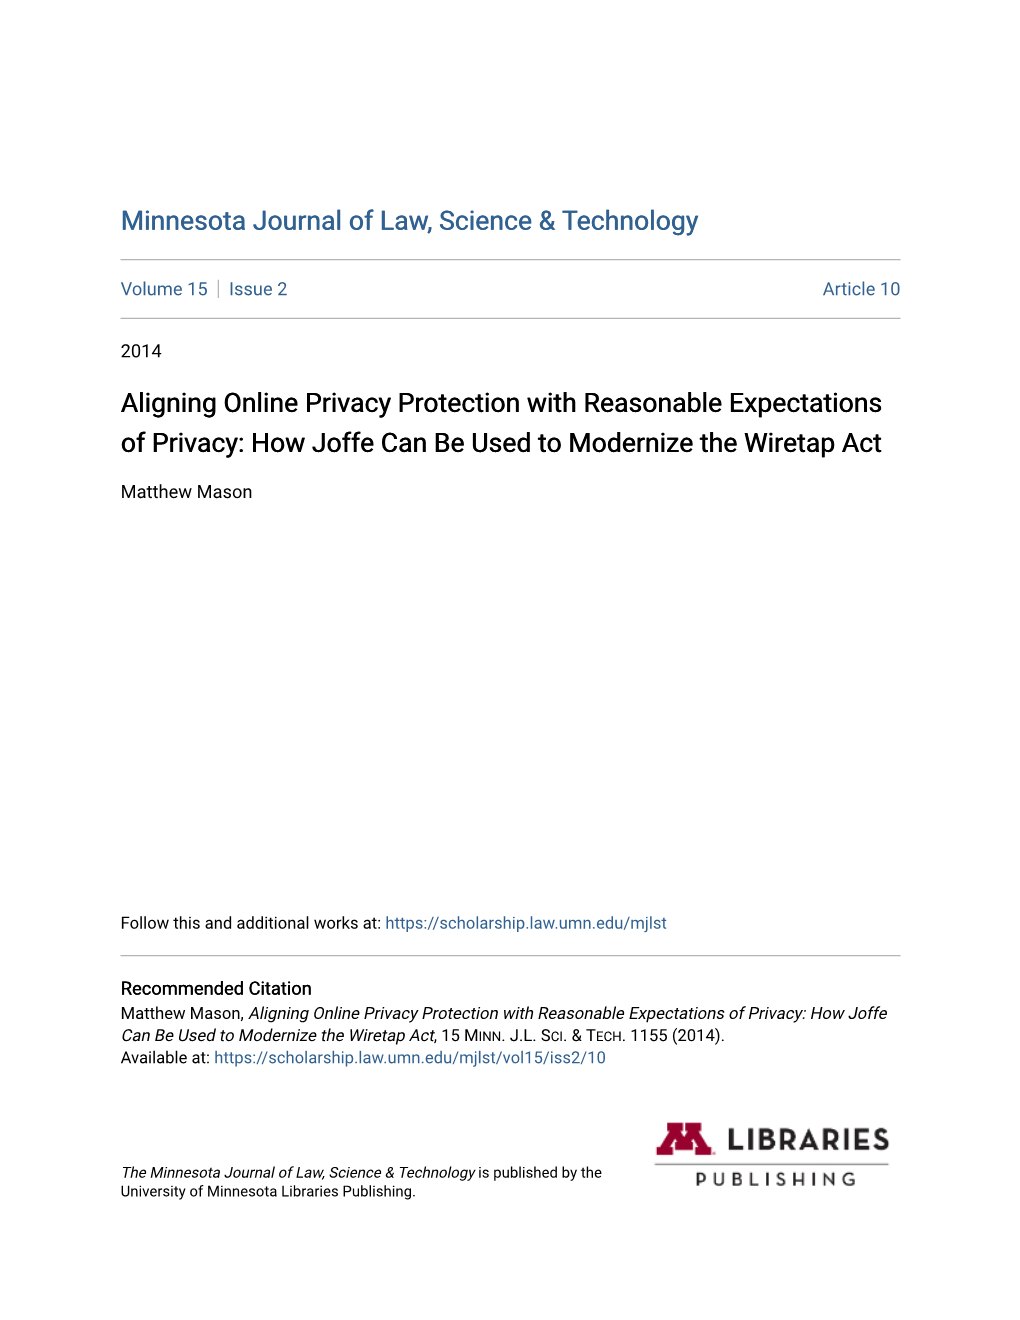 Aligning Online Privacy Protection with Reasonable Expectations of Privacy: How Joffe Can Be Used to Modernize the Wiretap Act